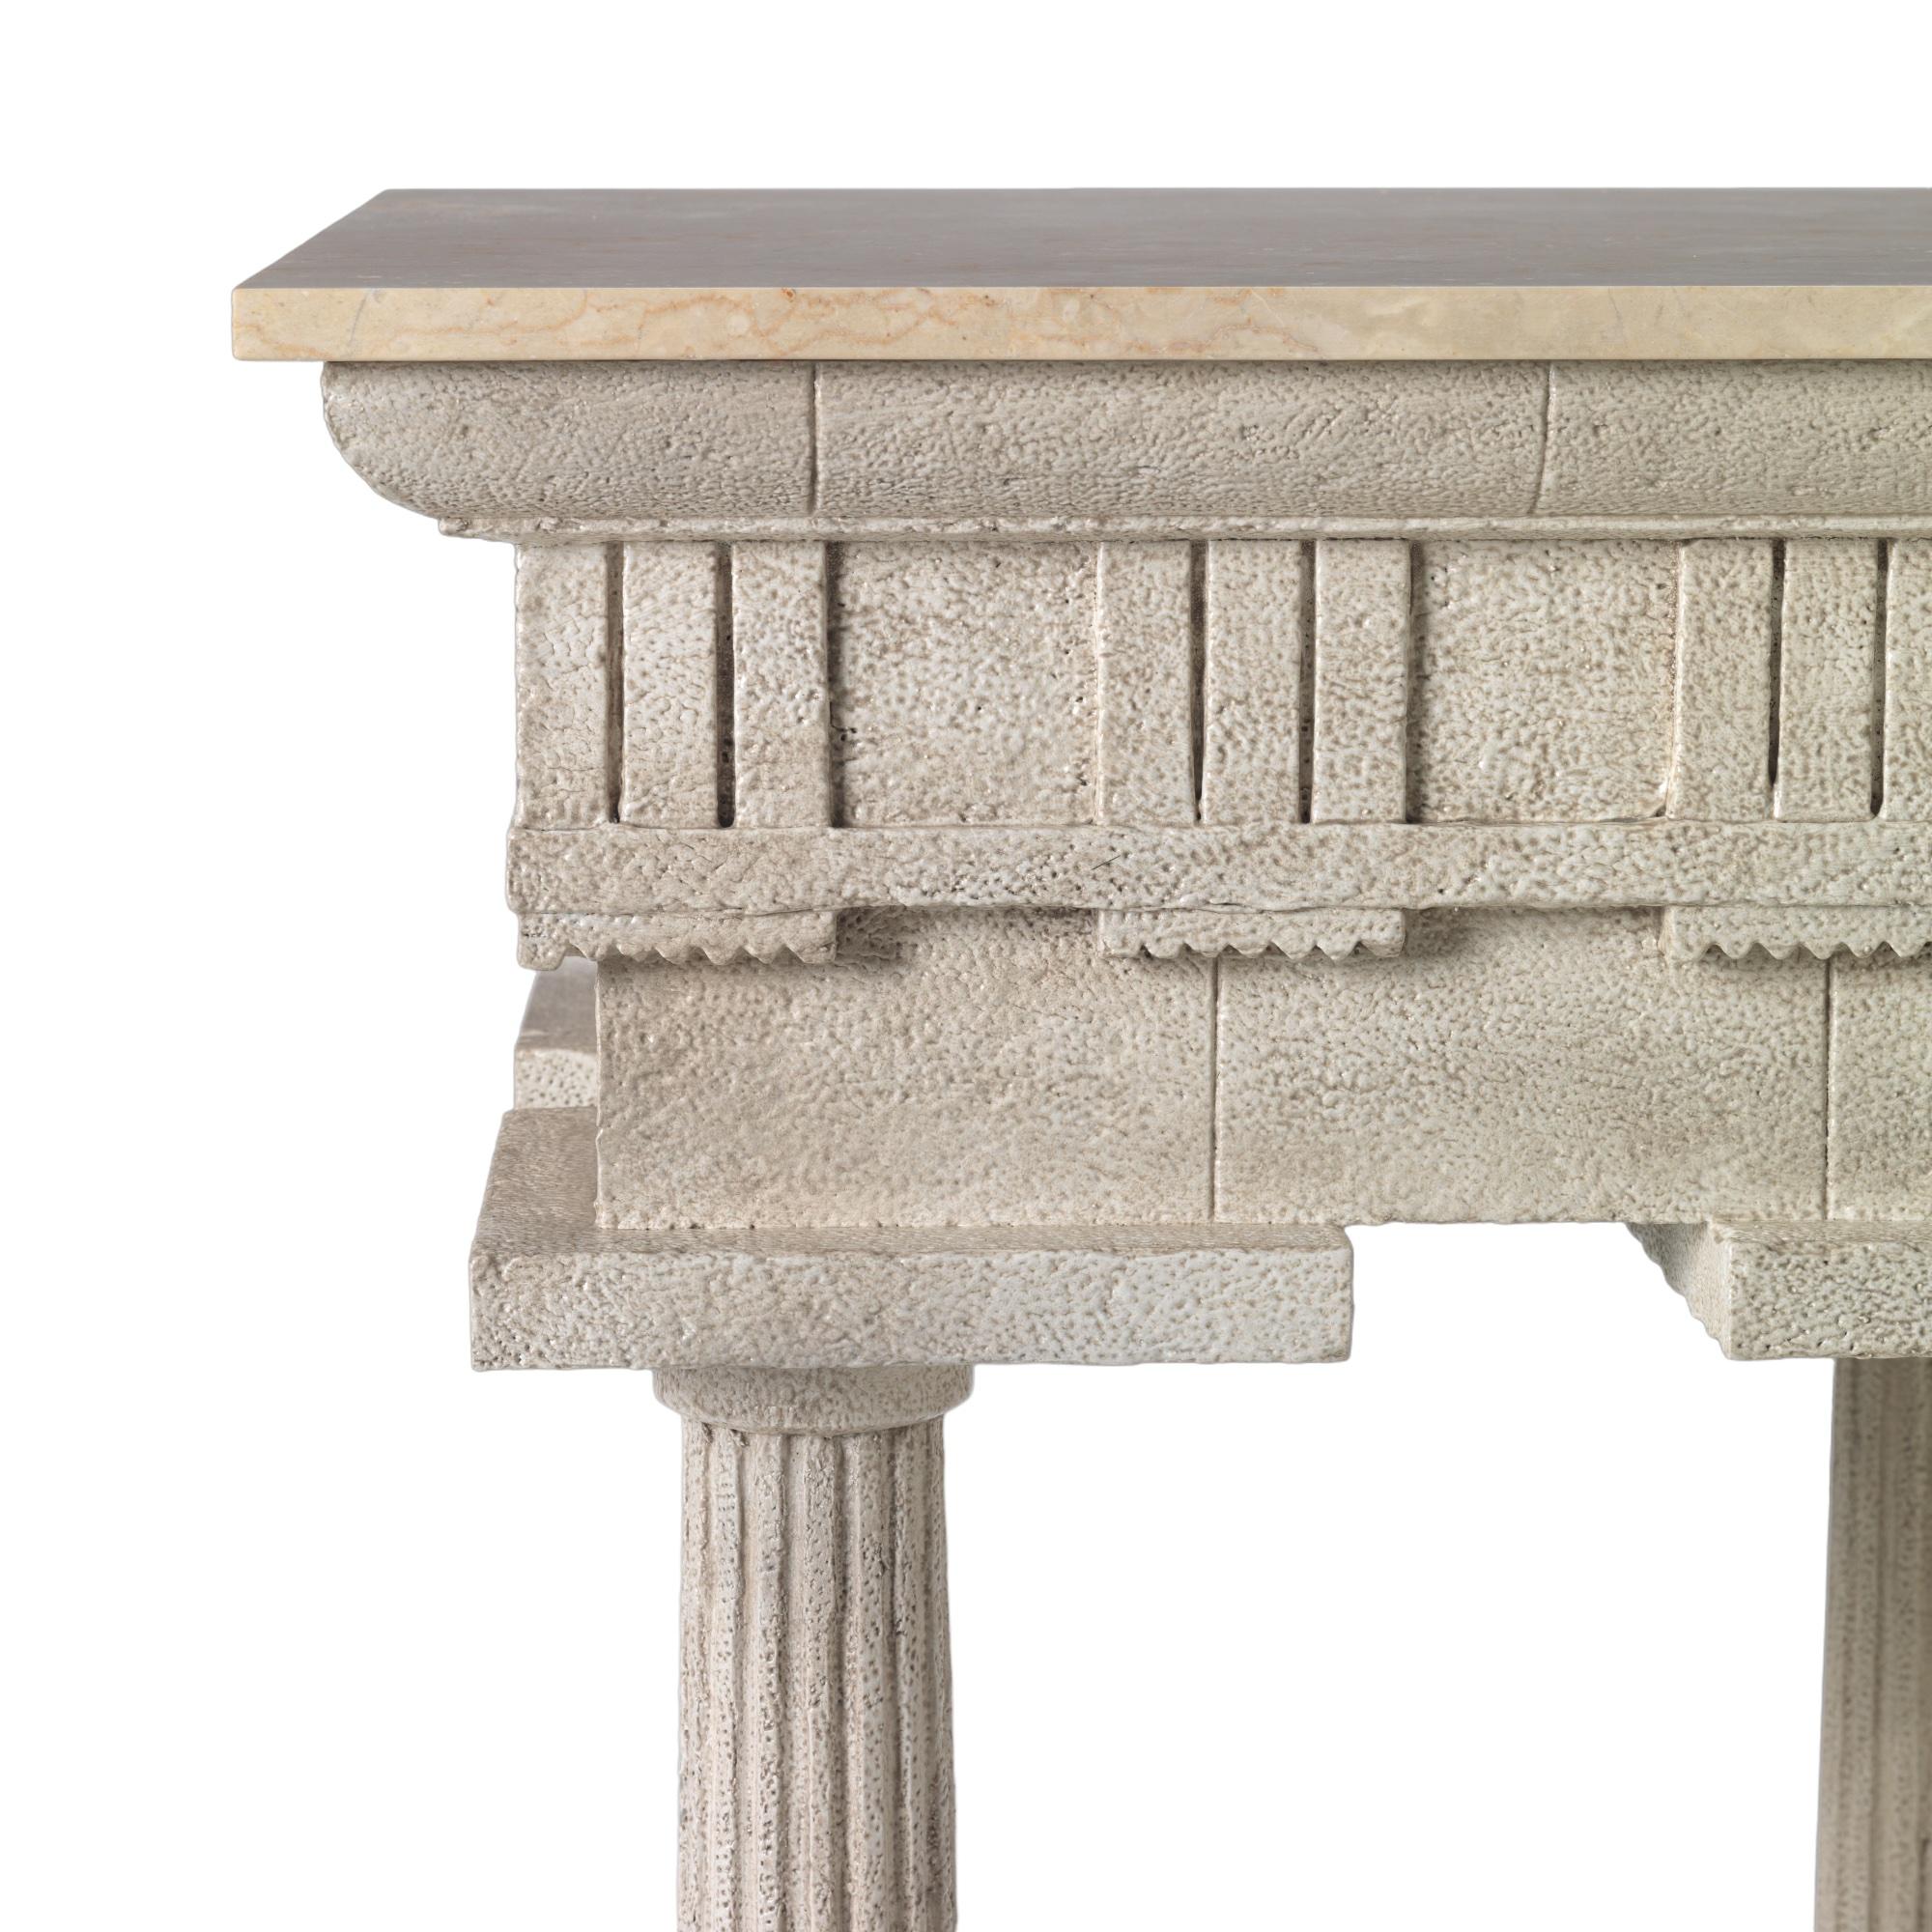 An exceptional Grand Tour design classical pedestal taking its inspiration from the Temple of Paestum. Carved in Mahogany and specialist aged stone painted and with a lightly aged marble top.